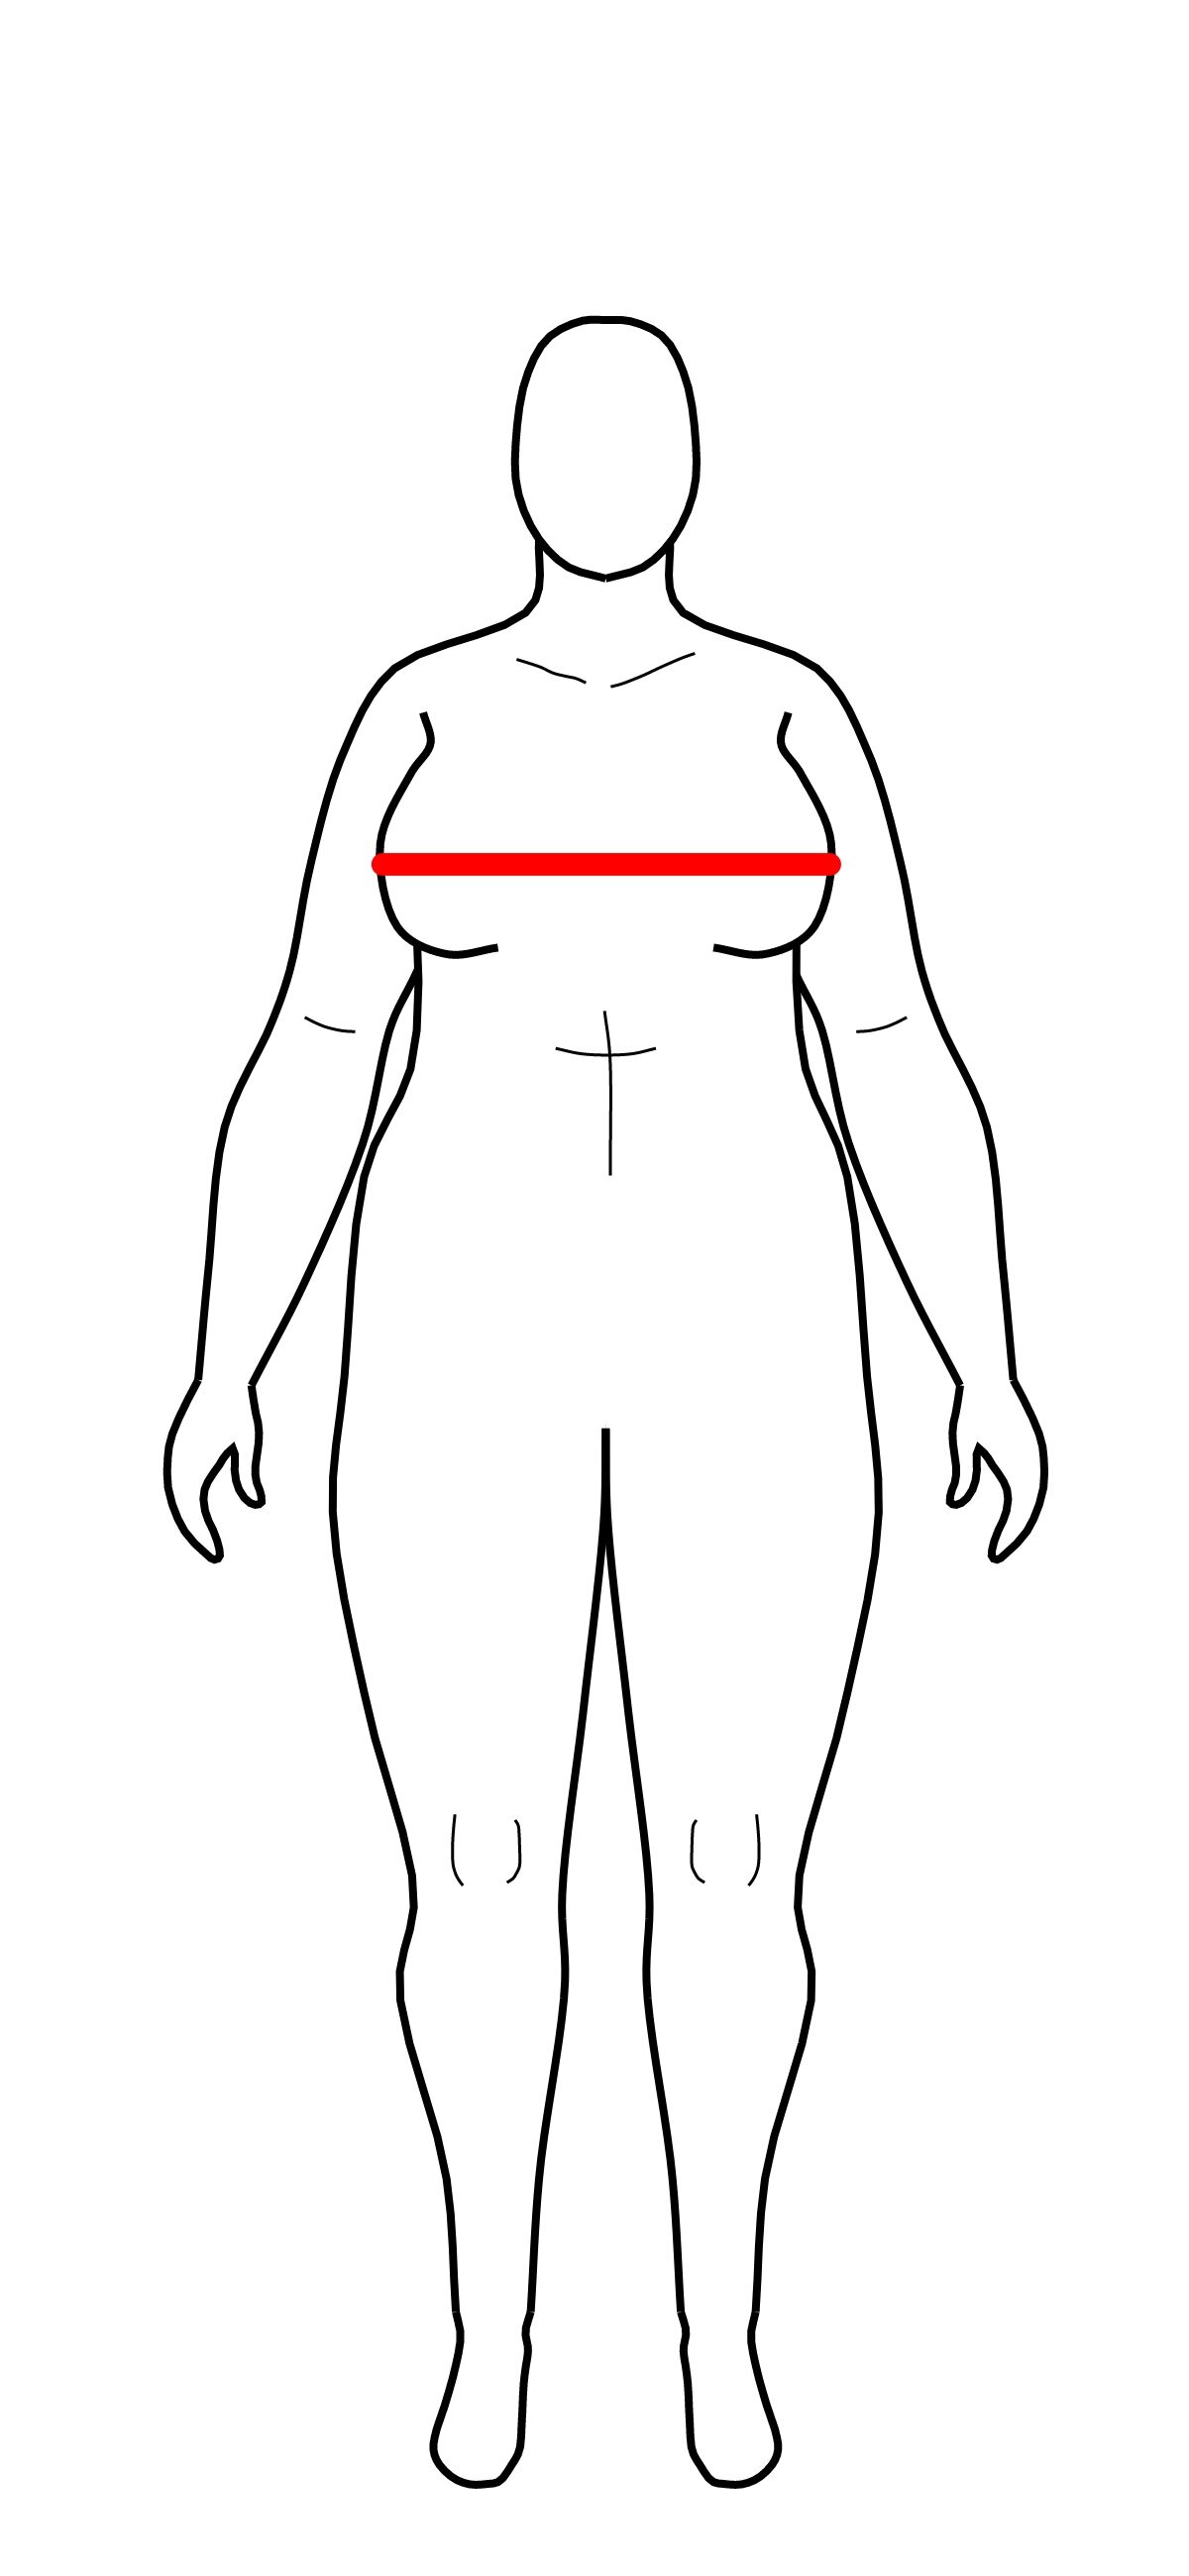 Full chest circumference with a bra (Copy)